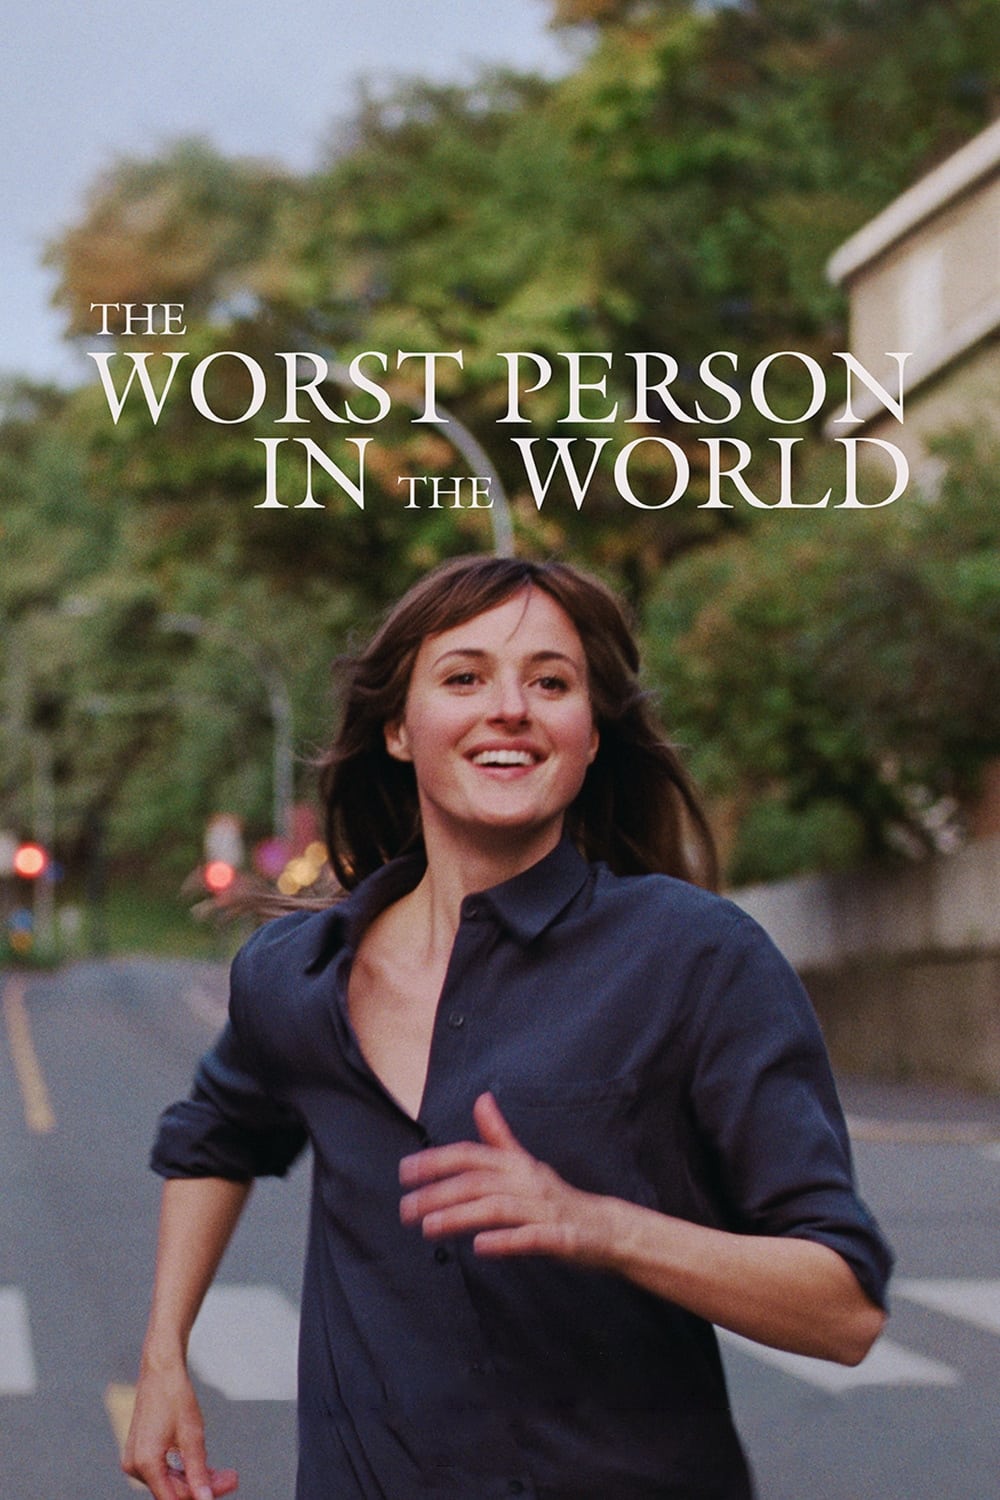 Poster for the movie "The Worst Person in the World"